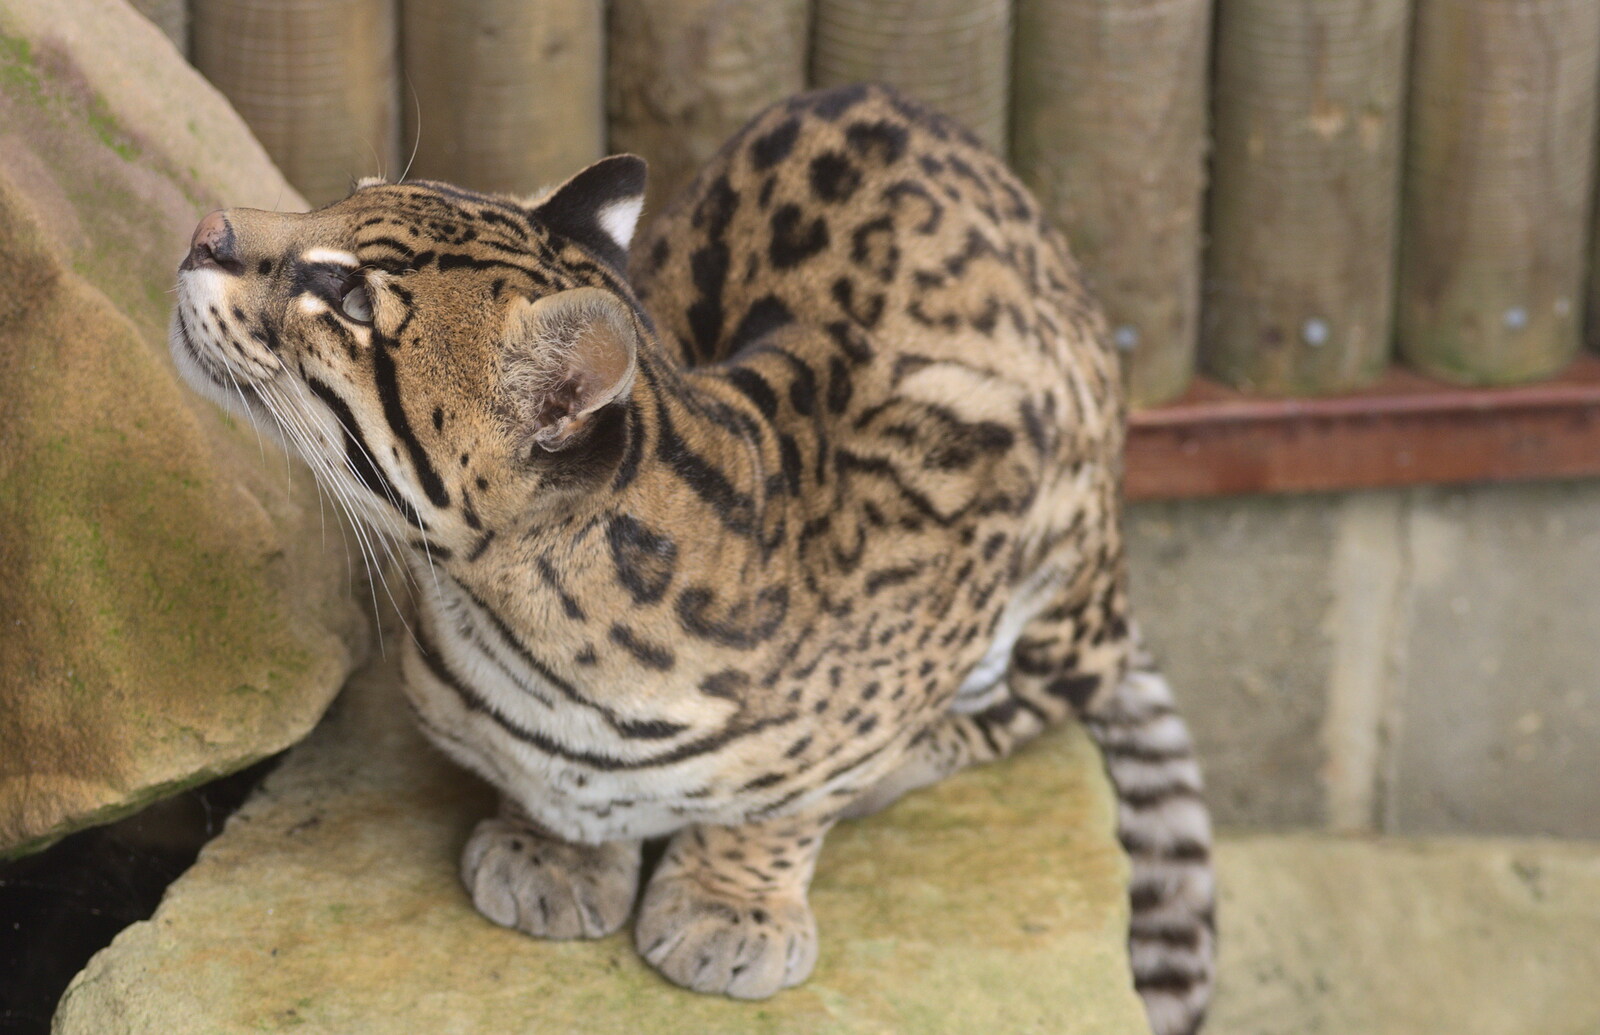 The ocelot looks up from Tiger Cubs at Banham Zoo, Banham, Norfolk - 6th August 2013